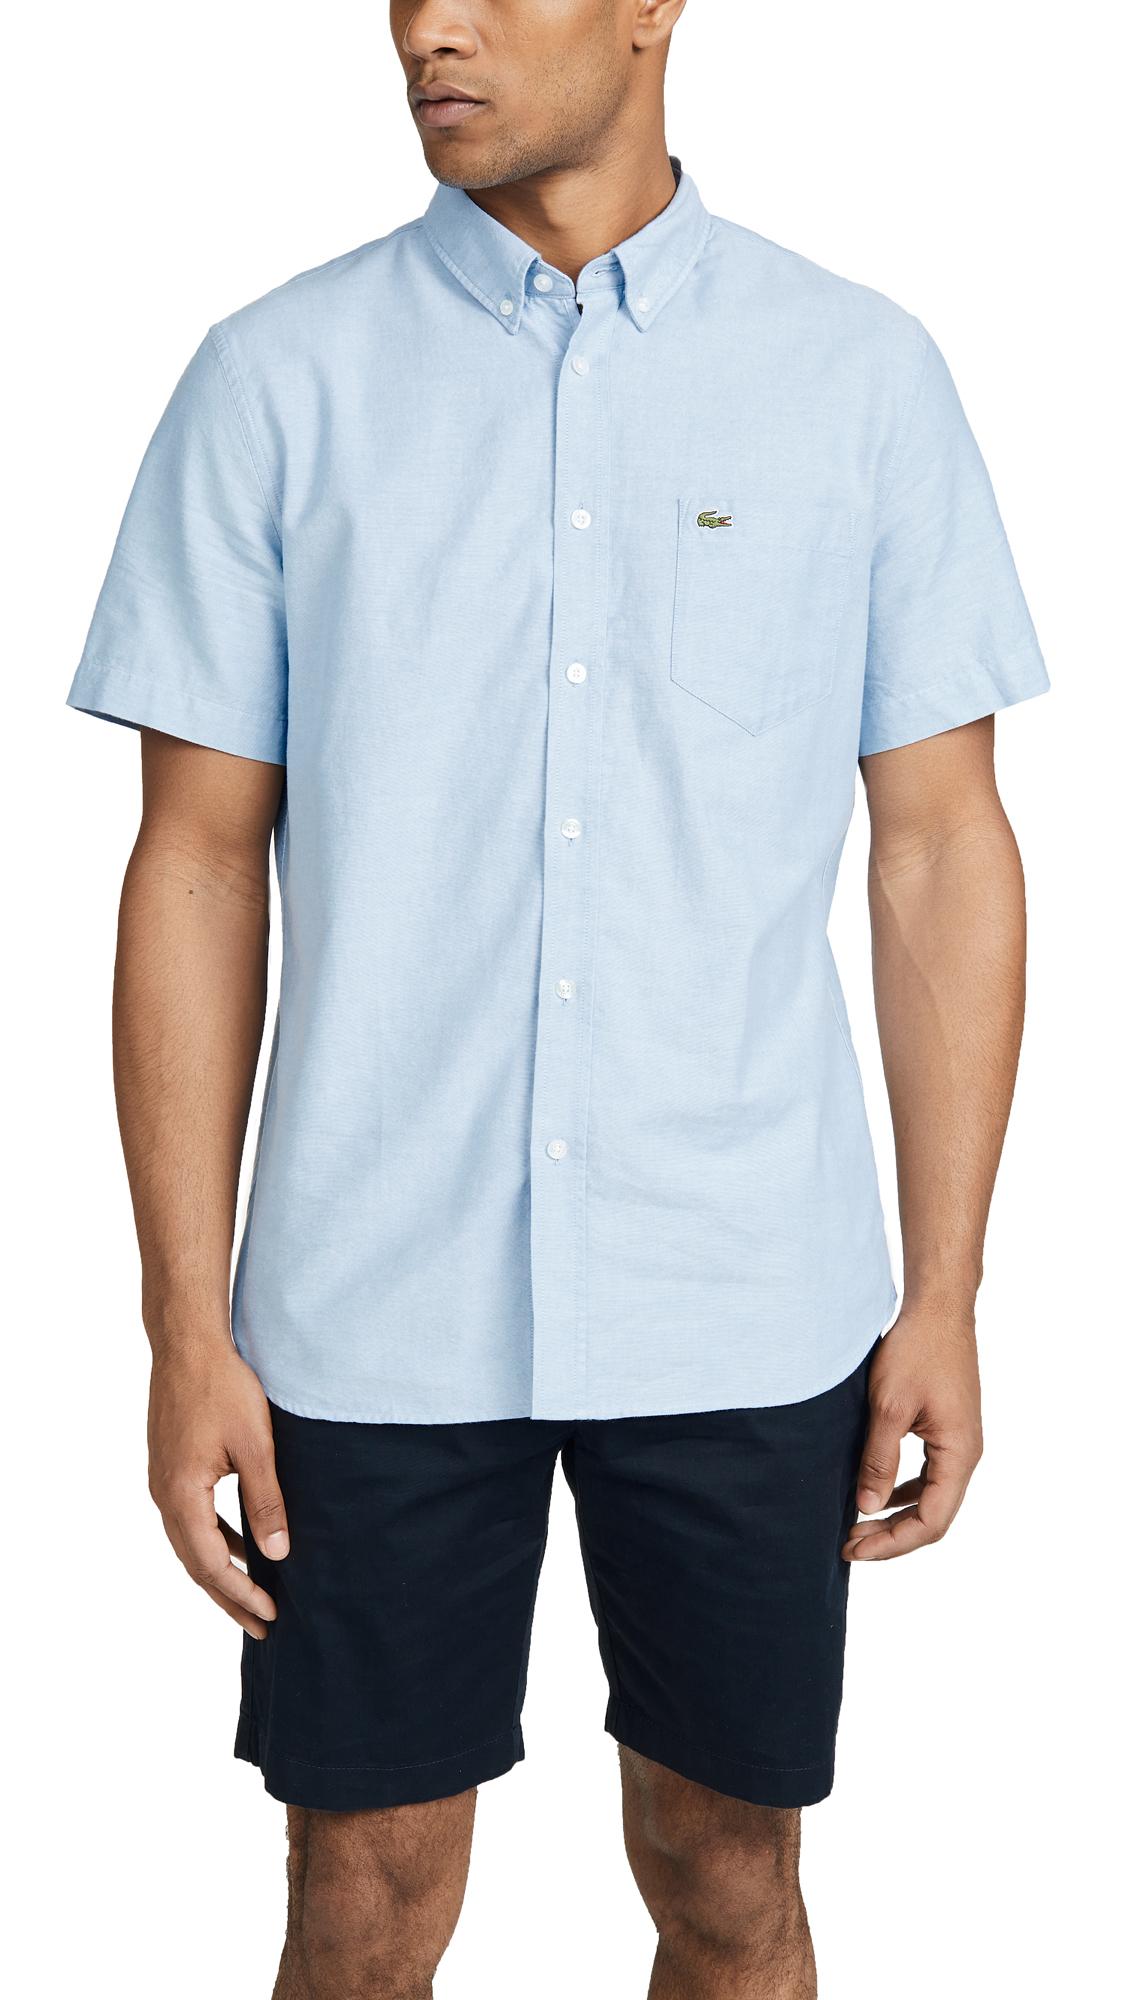 Lacoste Short Sleeve Button-down Oxford Shirt in Blue for Men - Lyst